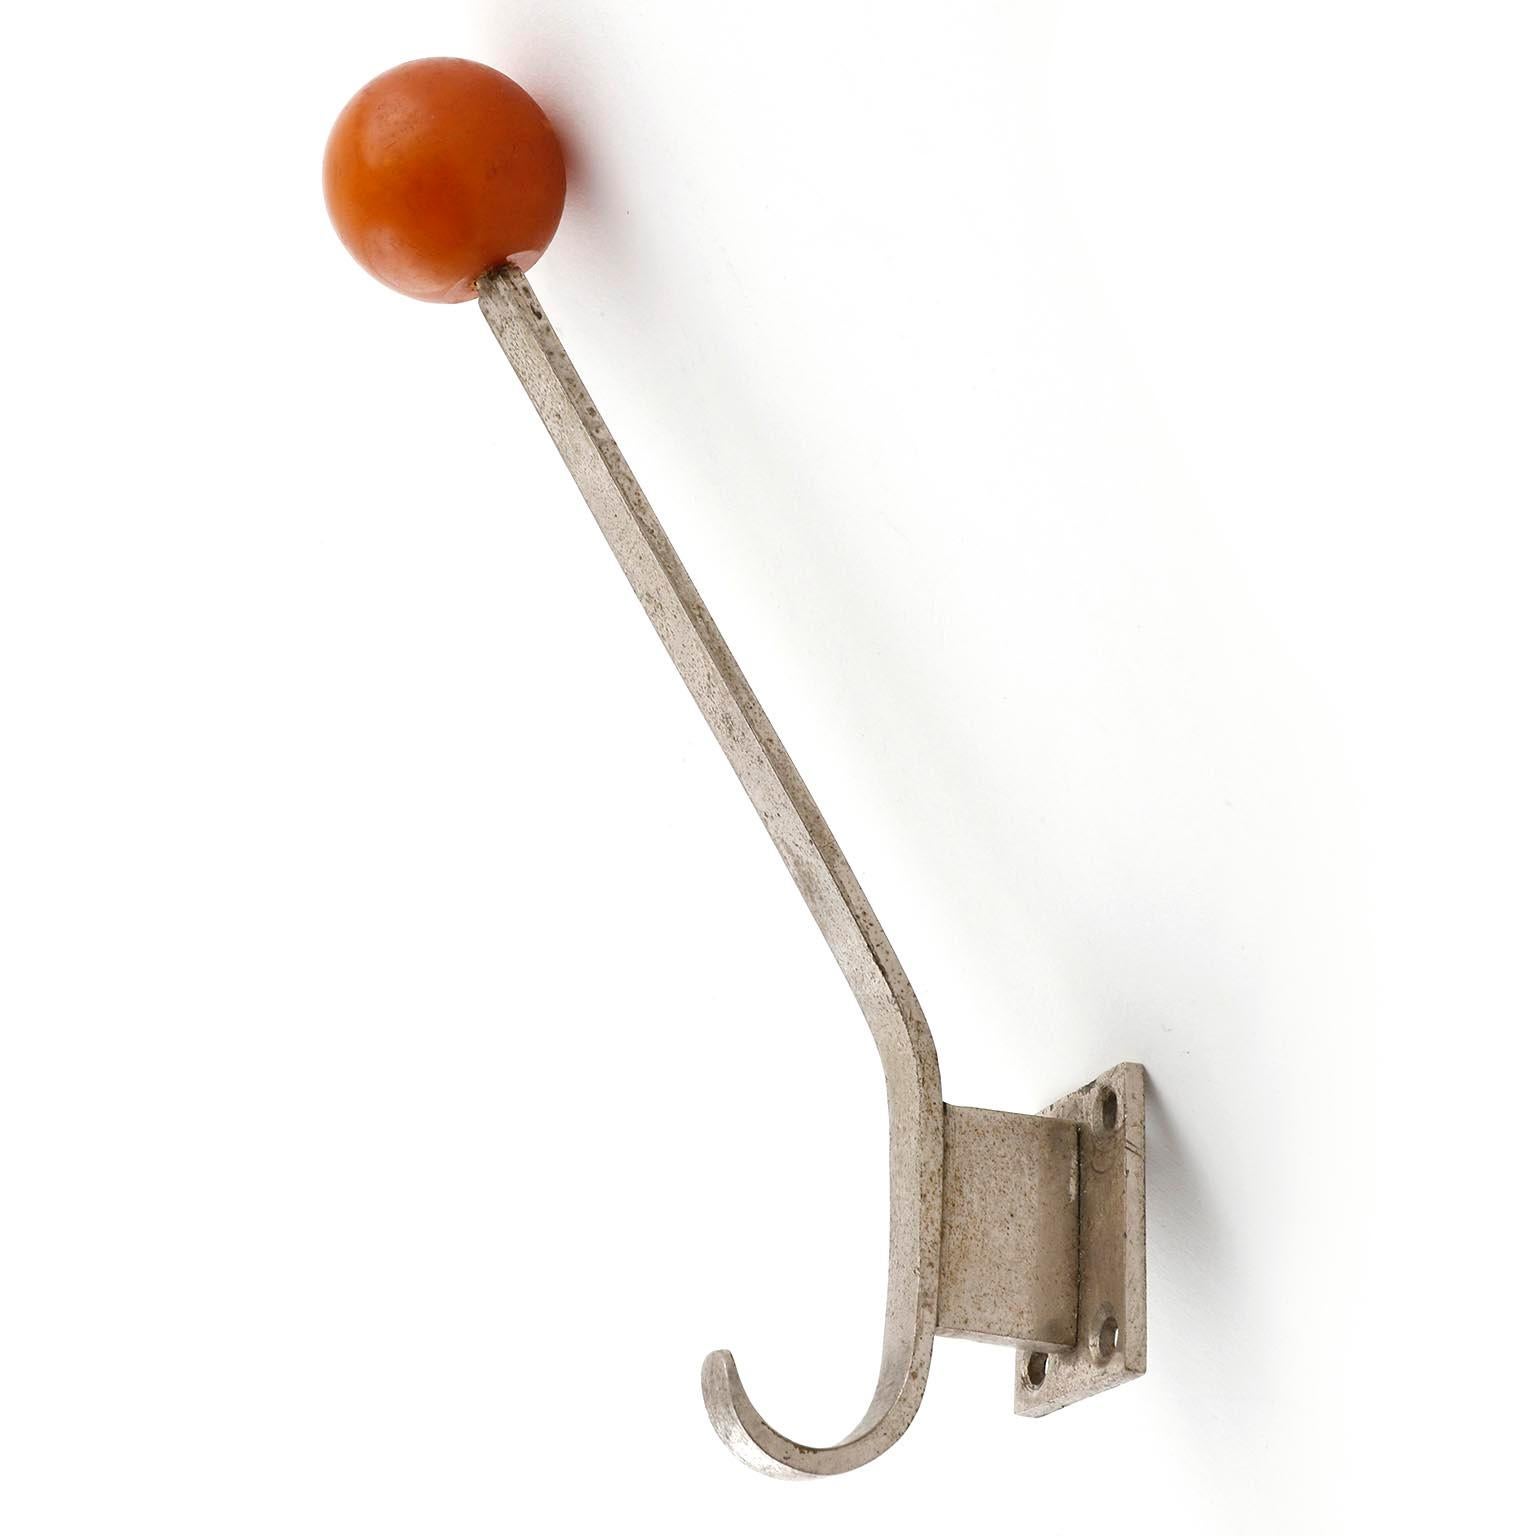 A set of six handmade Art Deco wall hooks, manufactured in Vienna, Austria, circa 1930. 
They are made of nickel-plated brass with red bakelite balls. They are in good condition with nice patina on nickel.
  